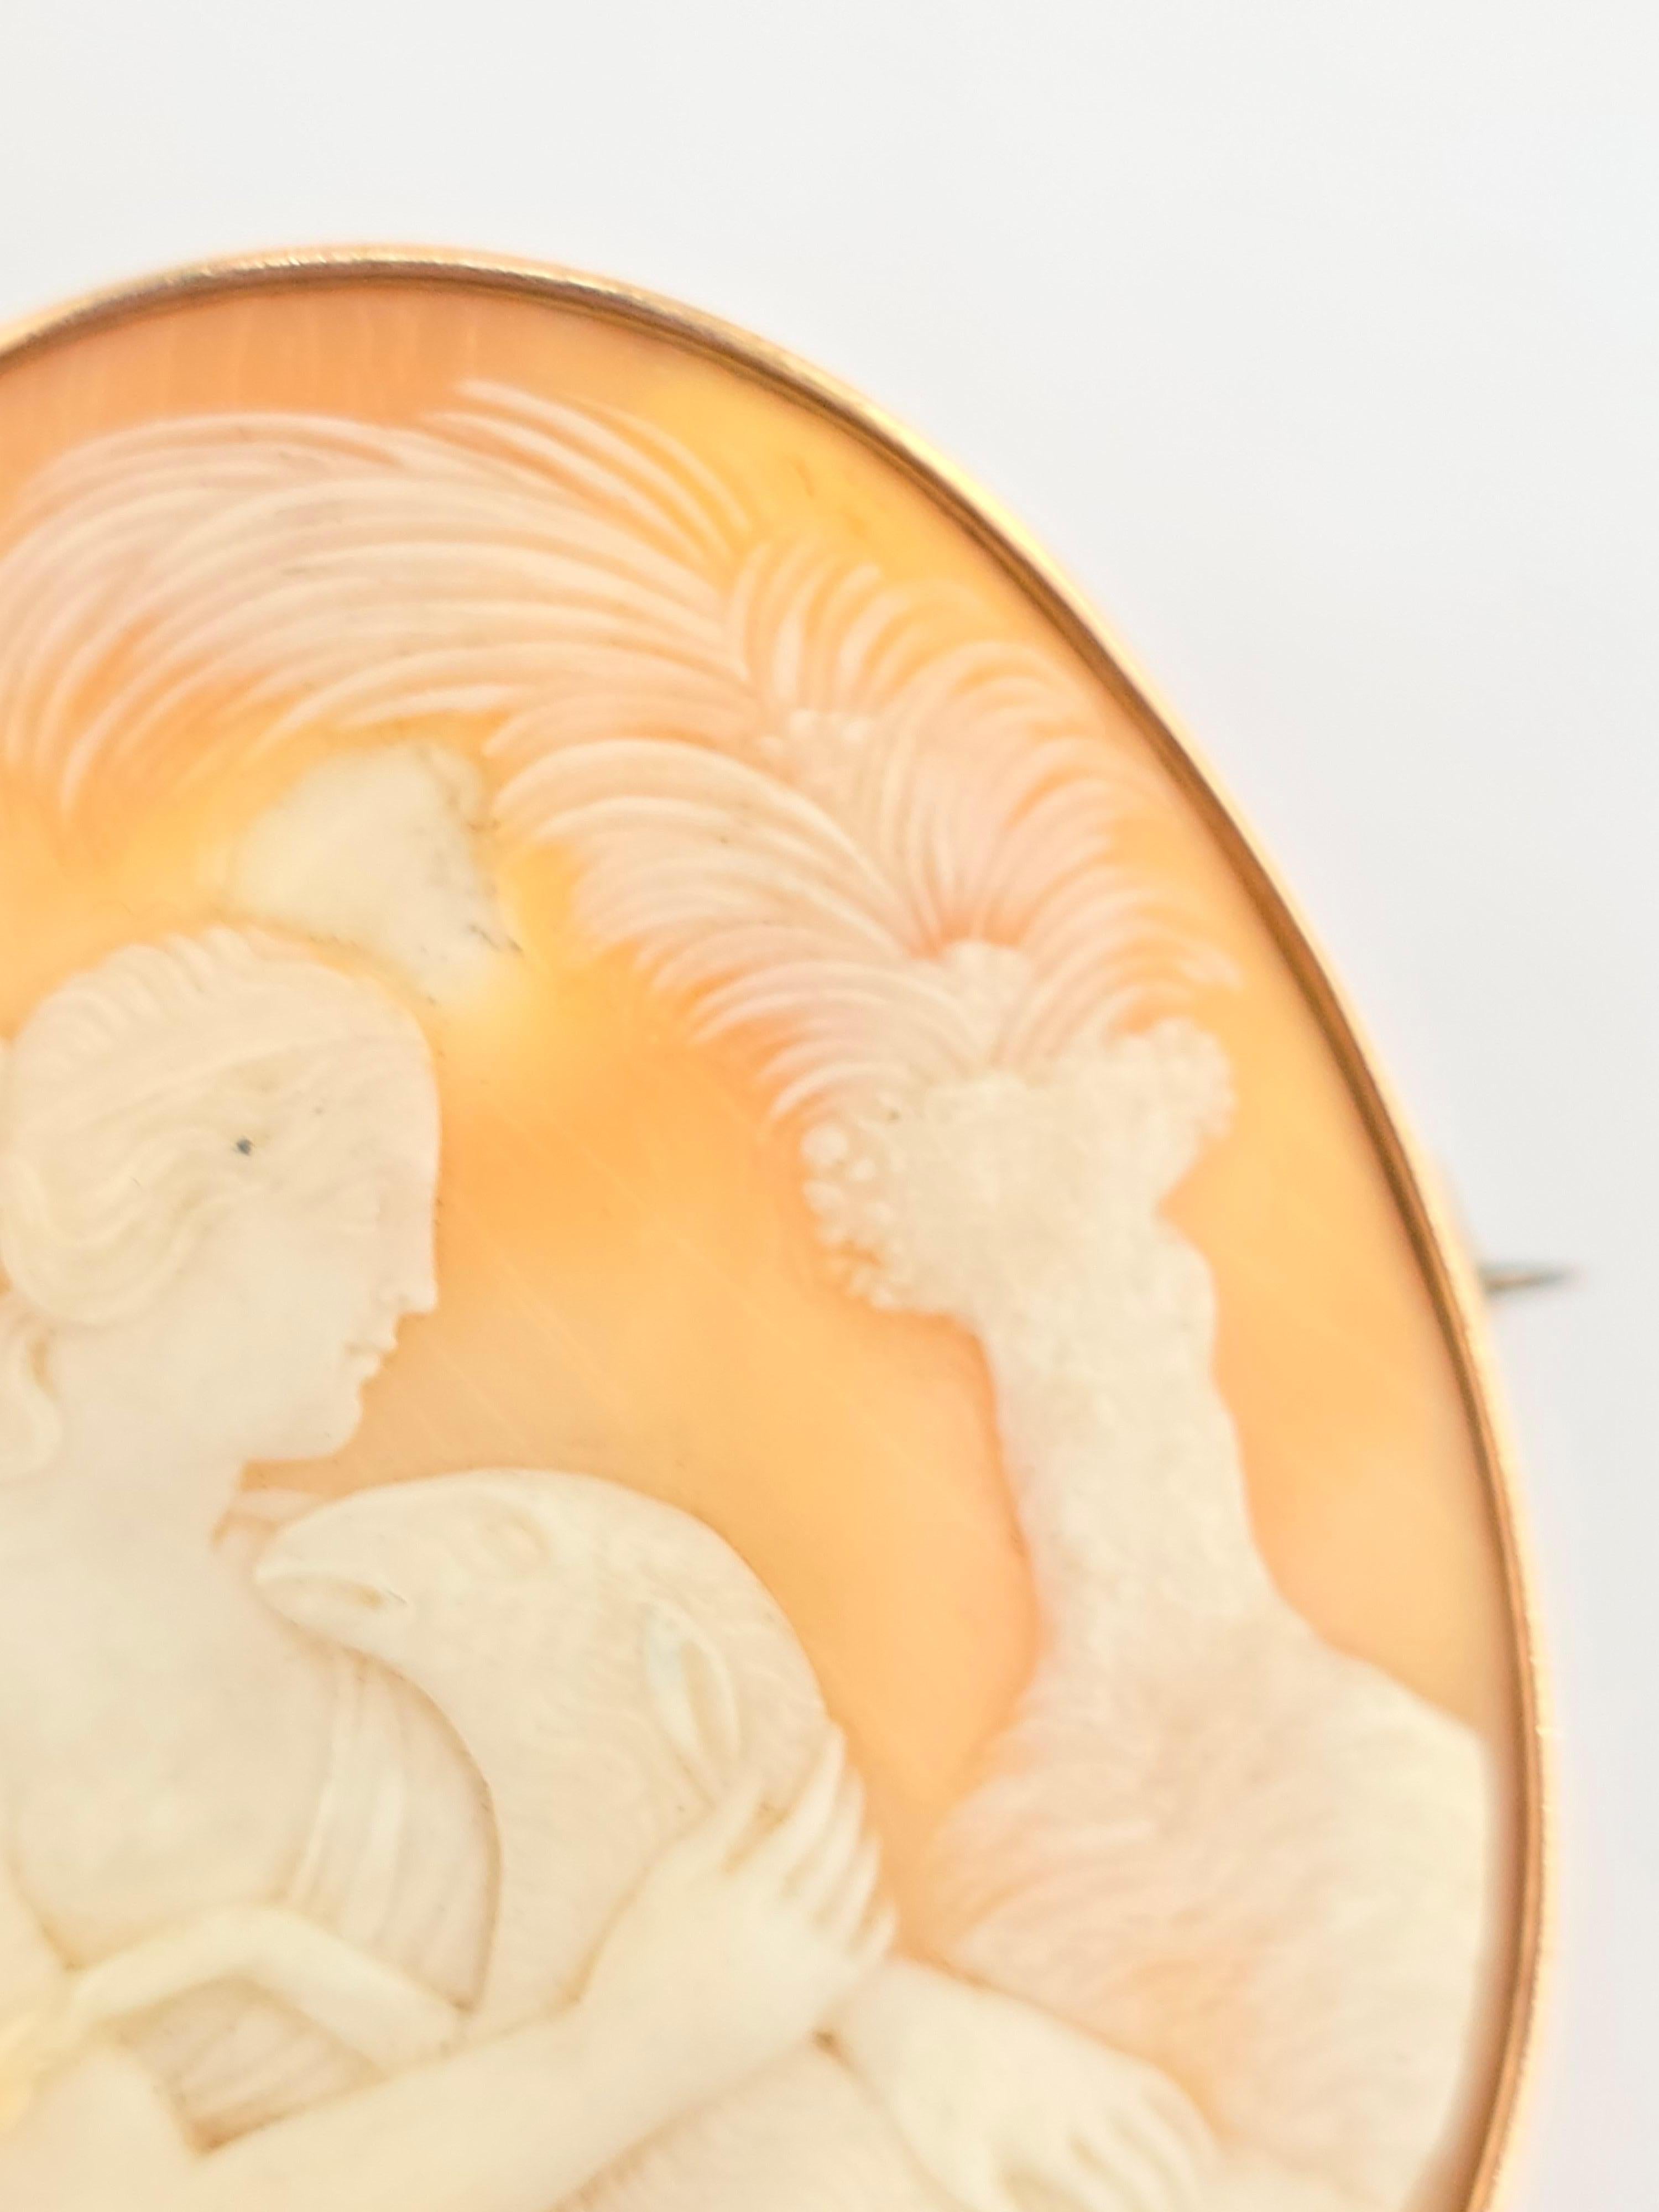 Exceptional Quality 14K Yellow Gold Cameo Brooch With Superb Carving In Good Condition For Sale In Media, PA